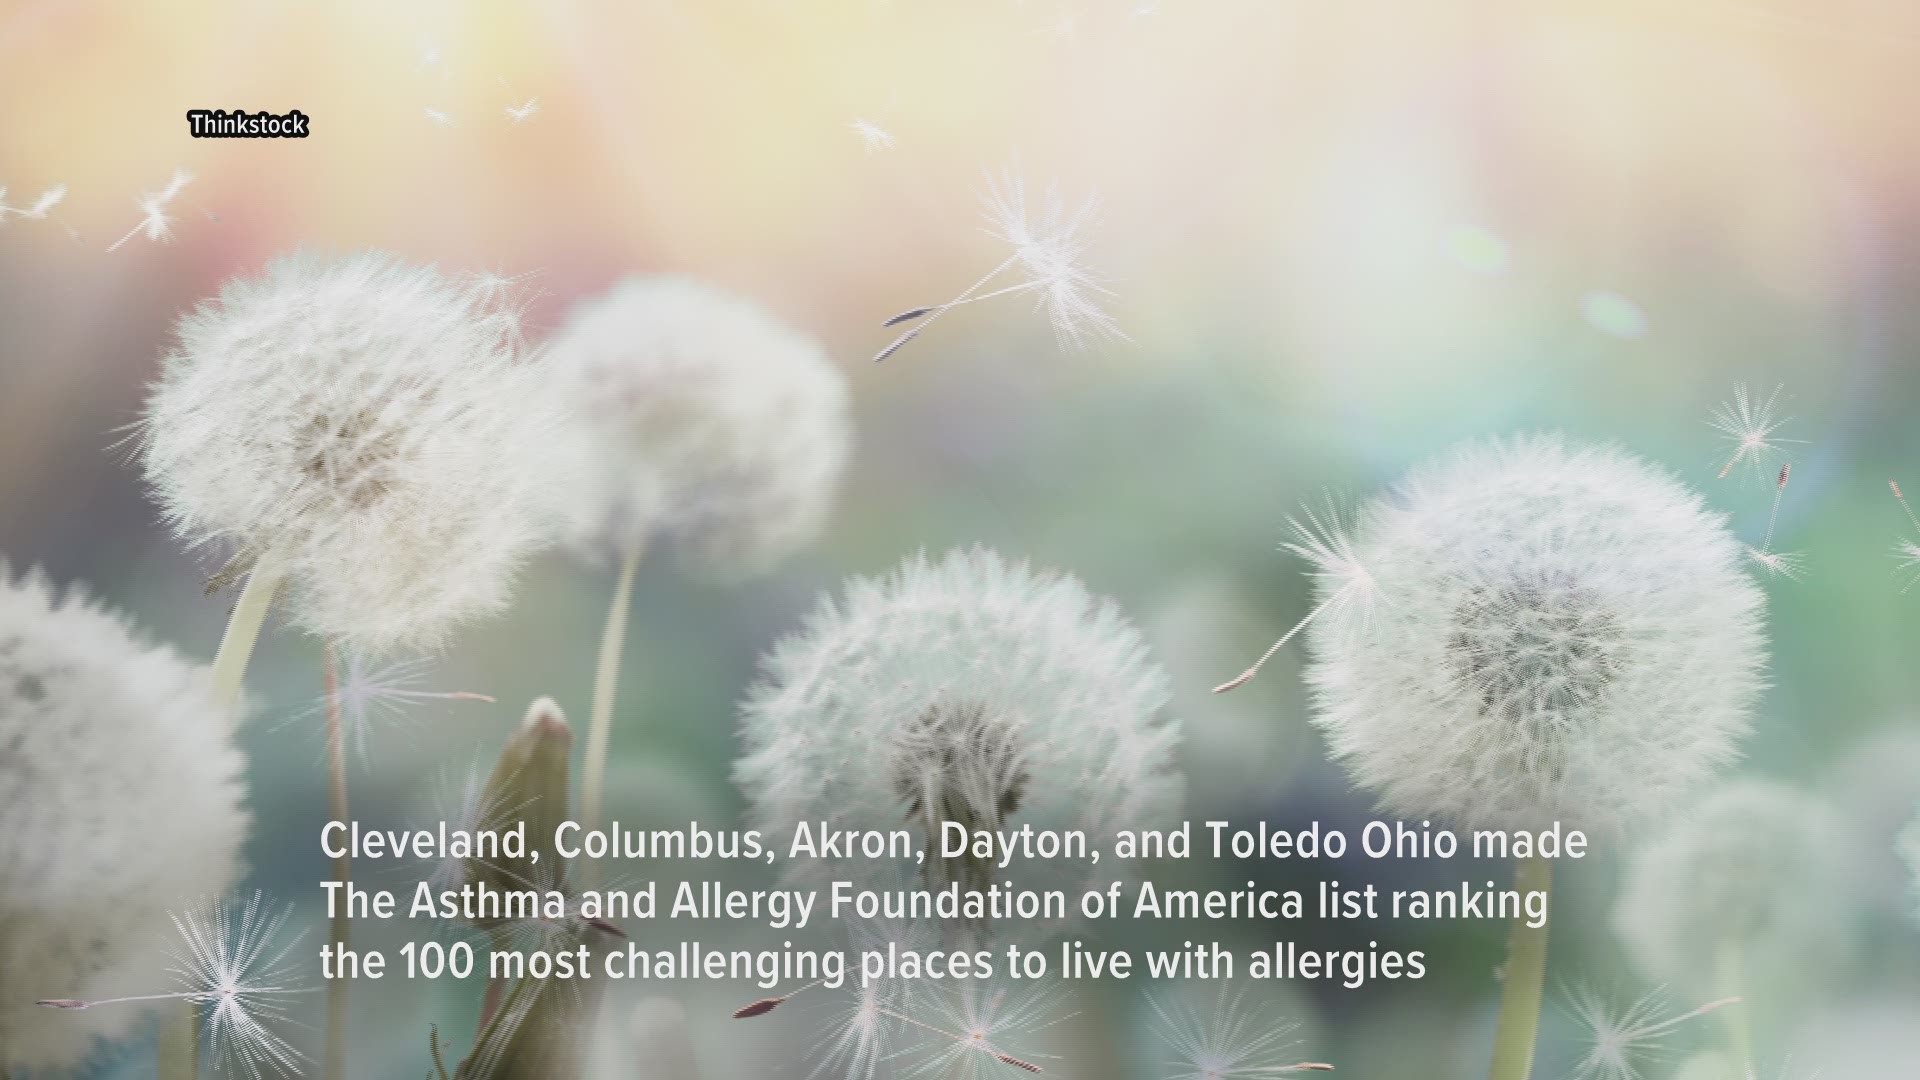 Cleveland, OH makes the list of 100 worst cities for allergies by The Asthma and Allergy Foundation of America